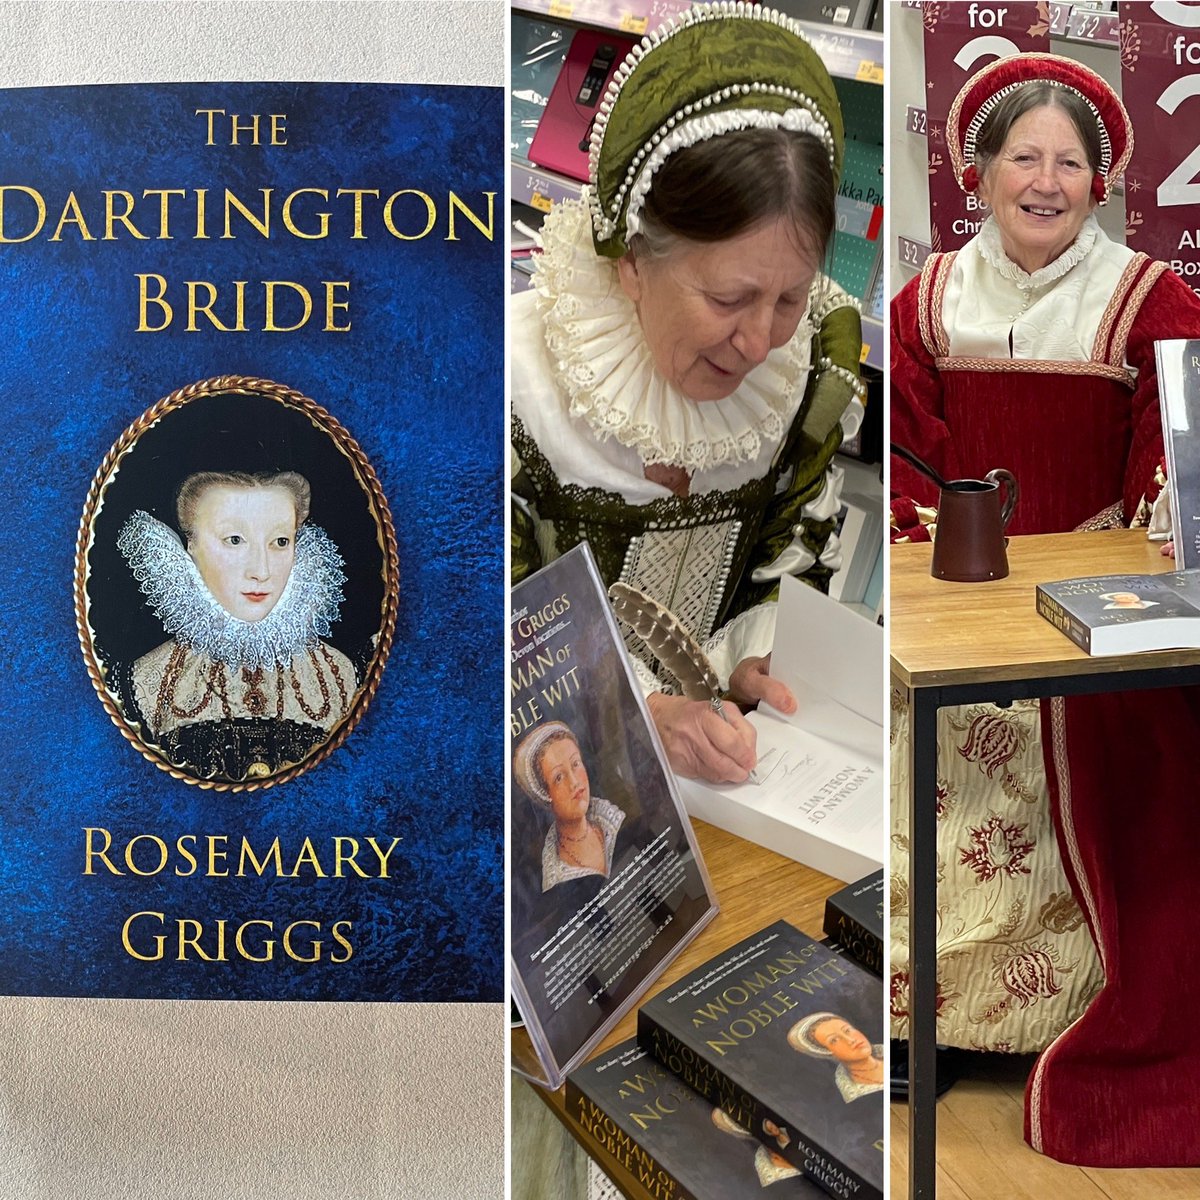 Meet the author — or is it the Lady Katherine? I’m Looking forward to returning to WHSmiths Newton Abbot store tomorrow morning , Saturday 18 May, 10am — 1pm. I’ll have my quill pen to hand #bookevent #devon #newbook #newtonabbot #historicalfiction